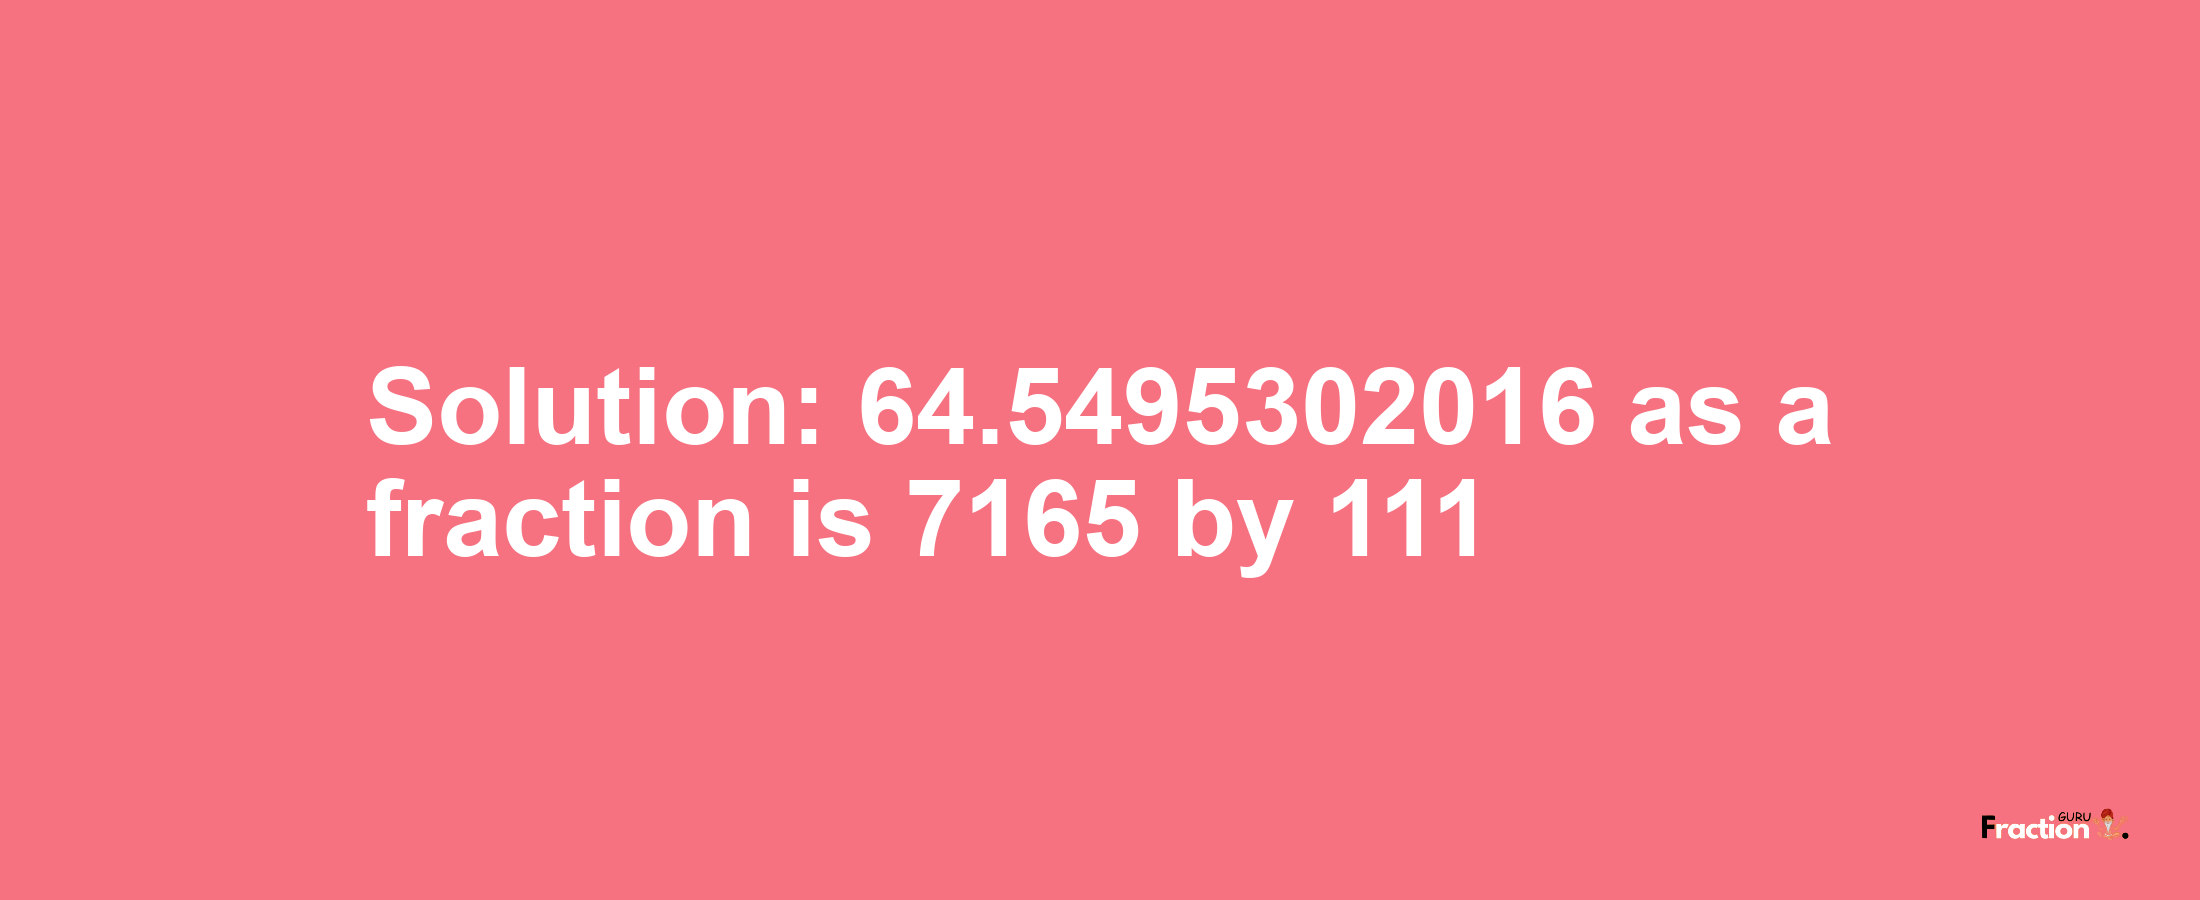 Solution:64.5495302016 as a fraction is 7165/111